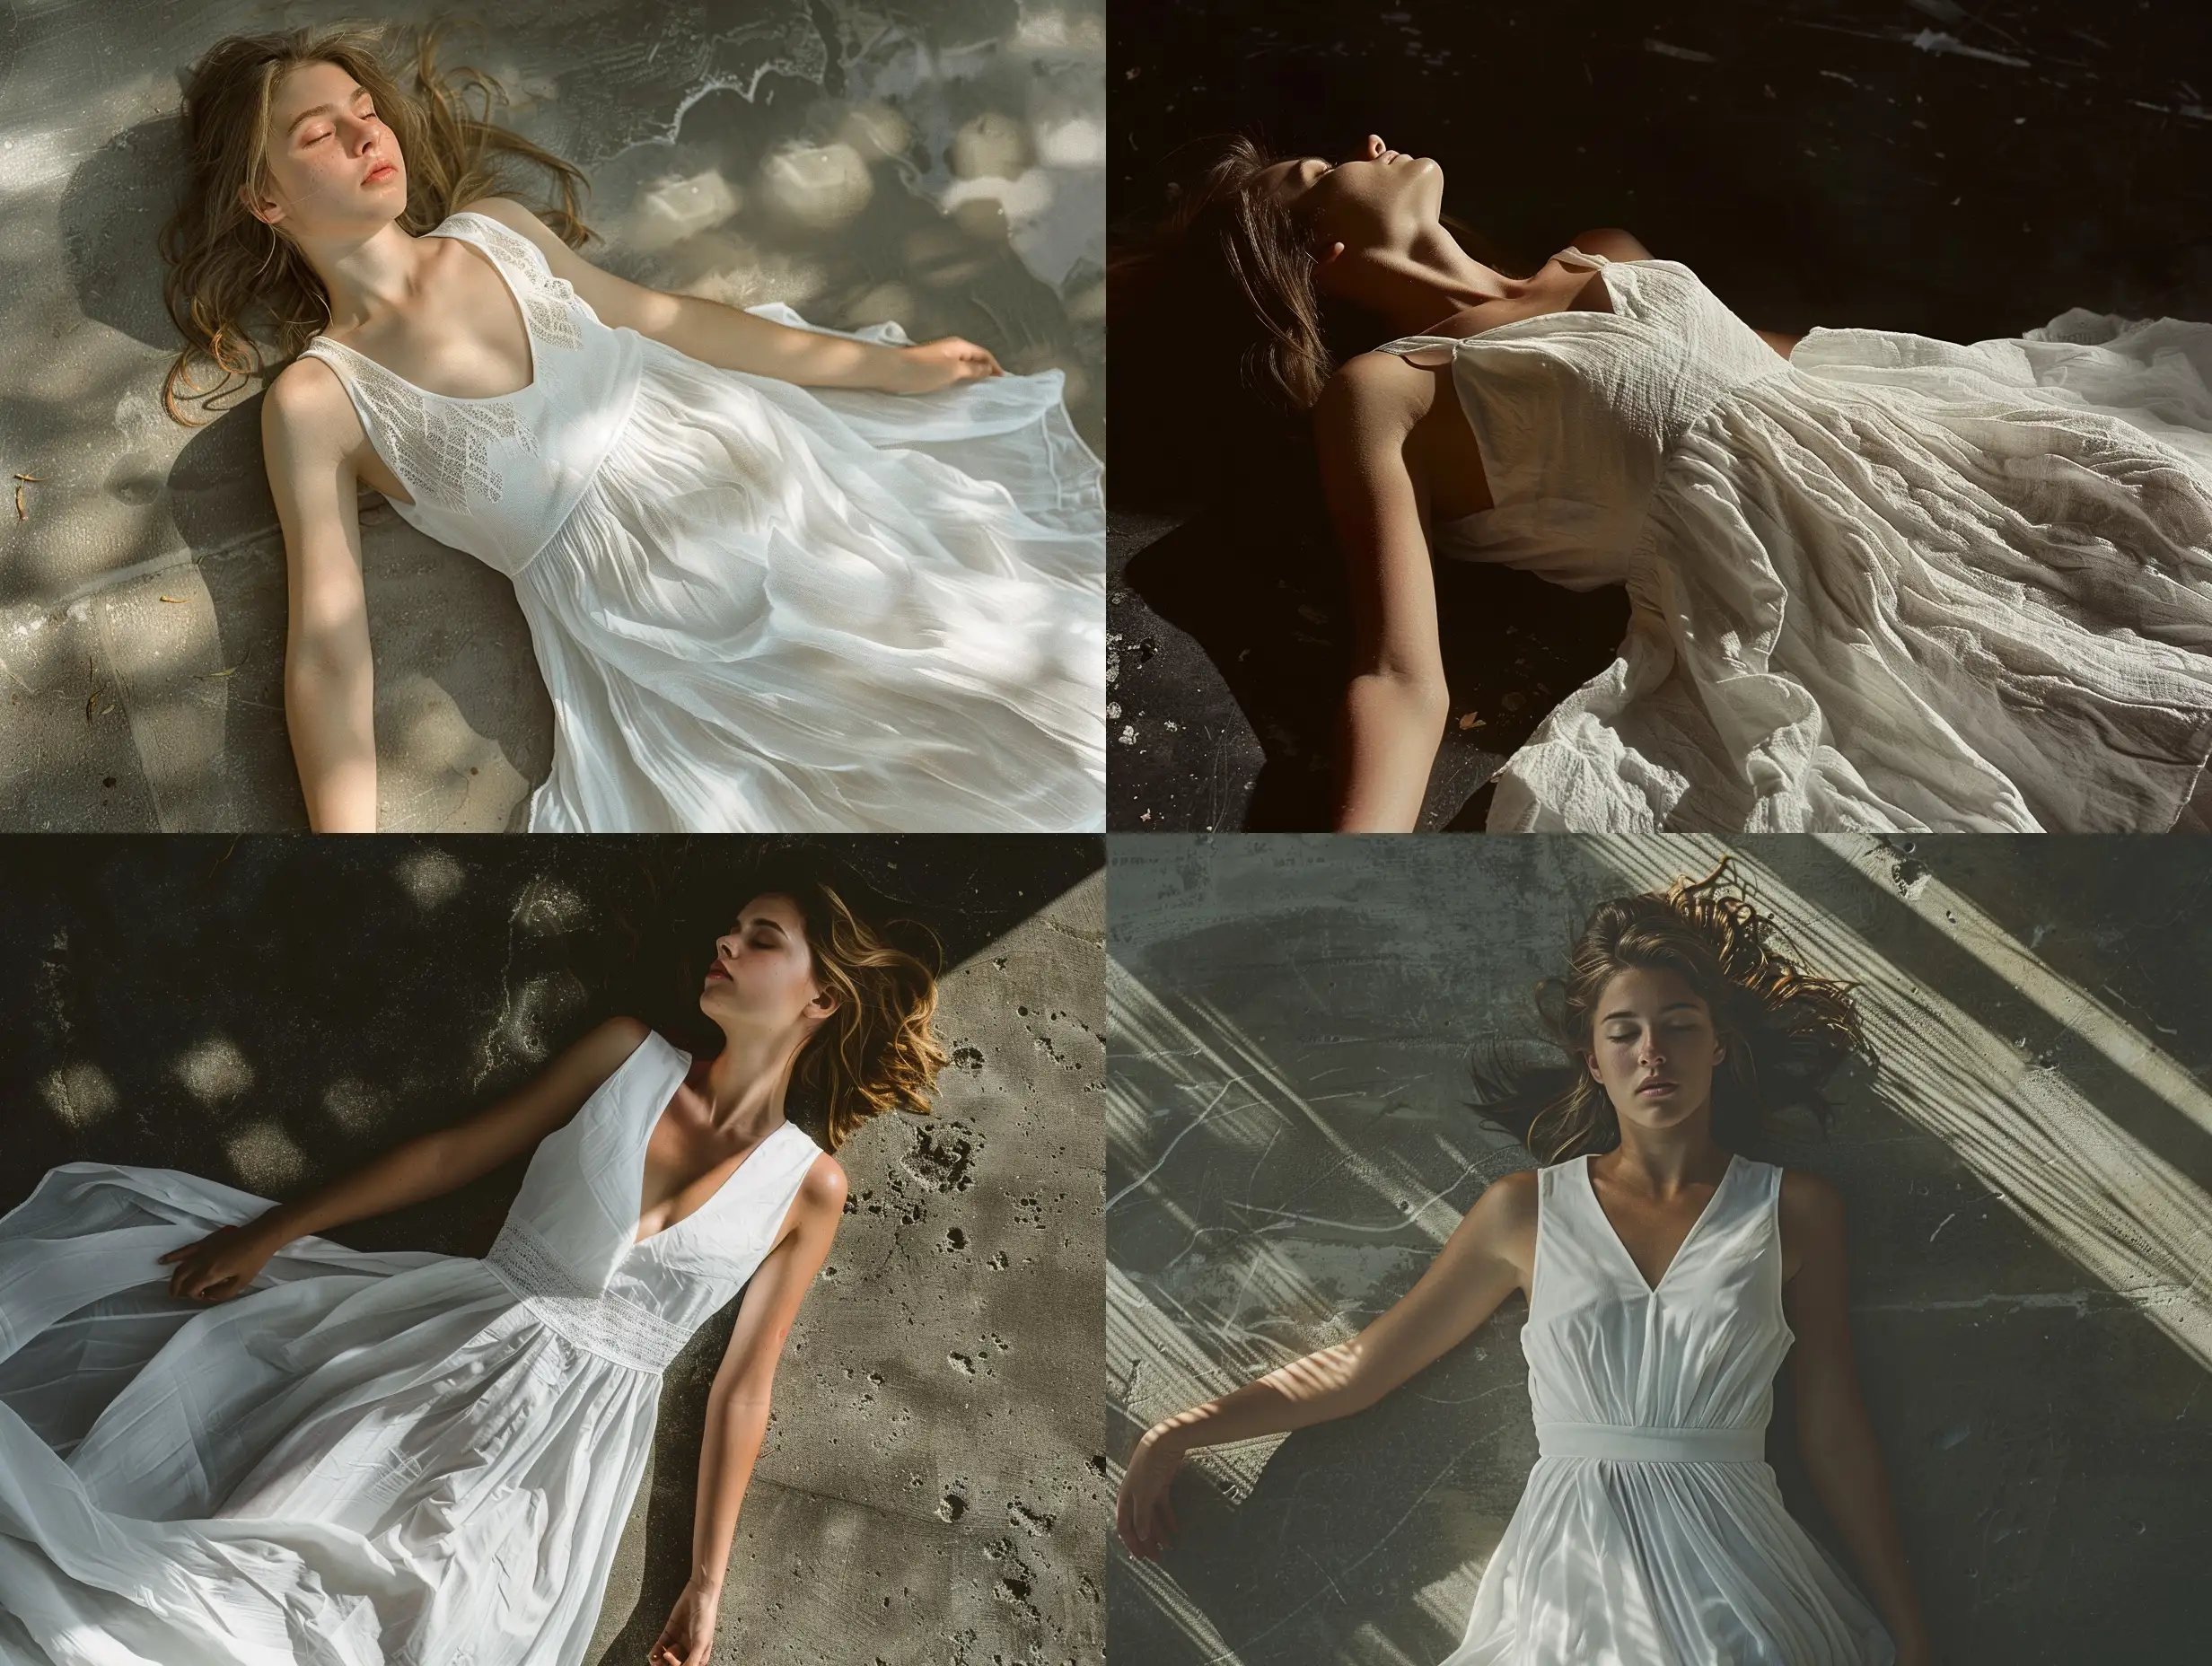 Girl-in-Modern-Sleeveless-Dress-Lying-on-Ground-in-Film-Photography-Style